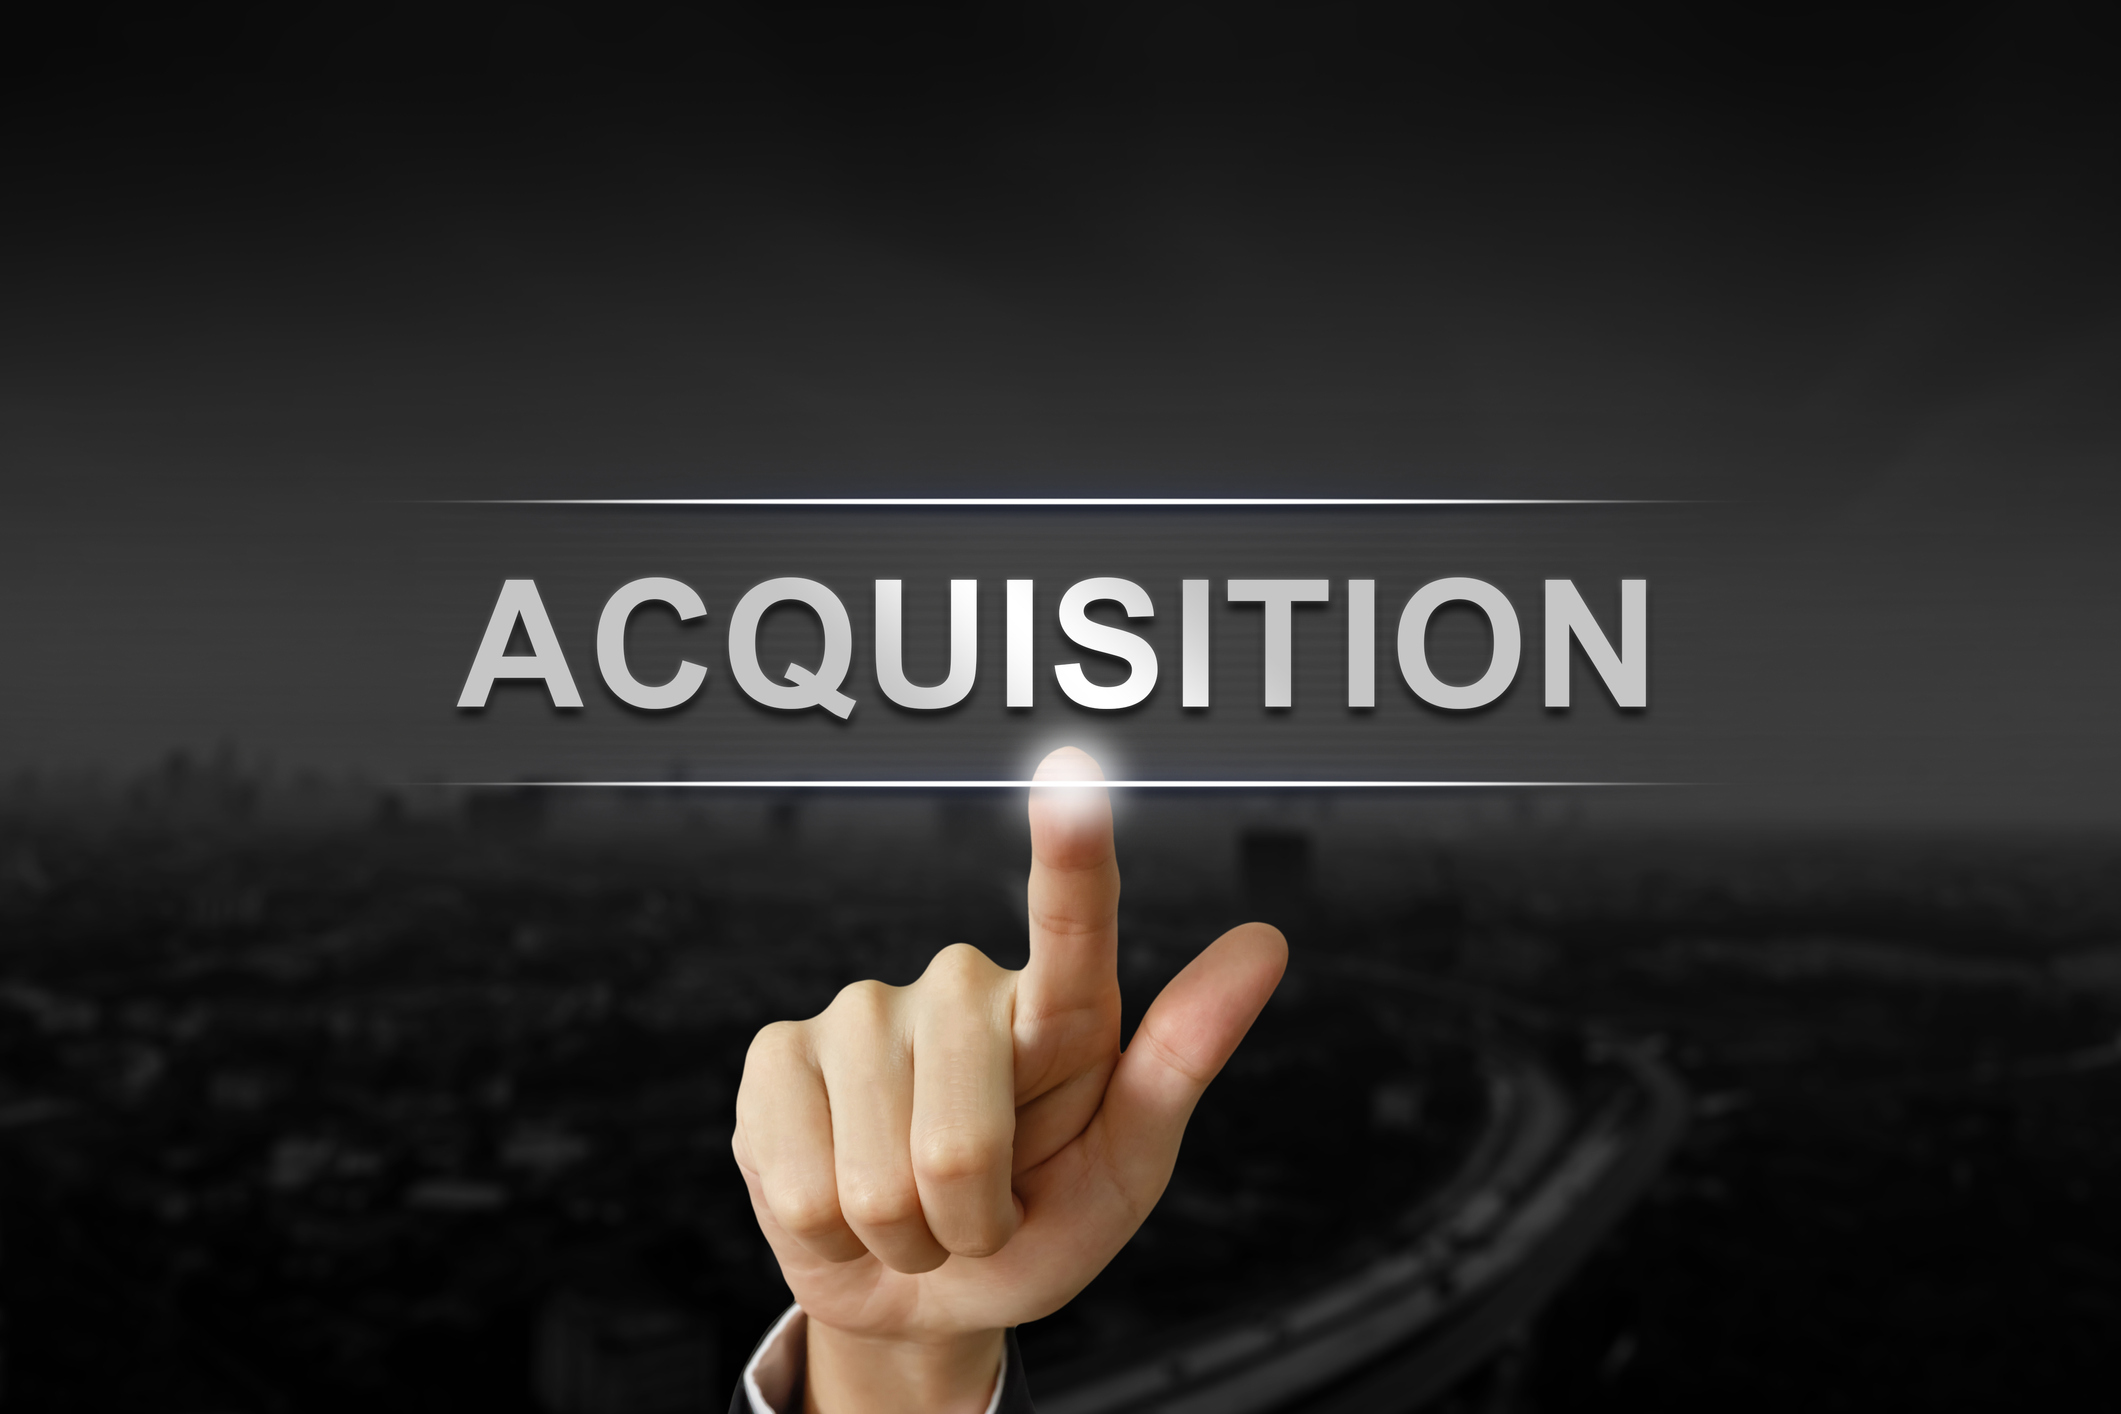 With this acquisition, TKH acquires specific parking related video analytics technology.